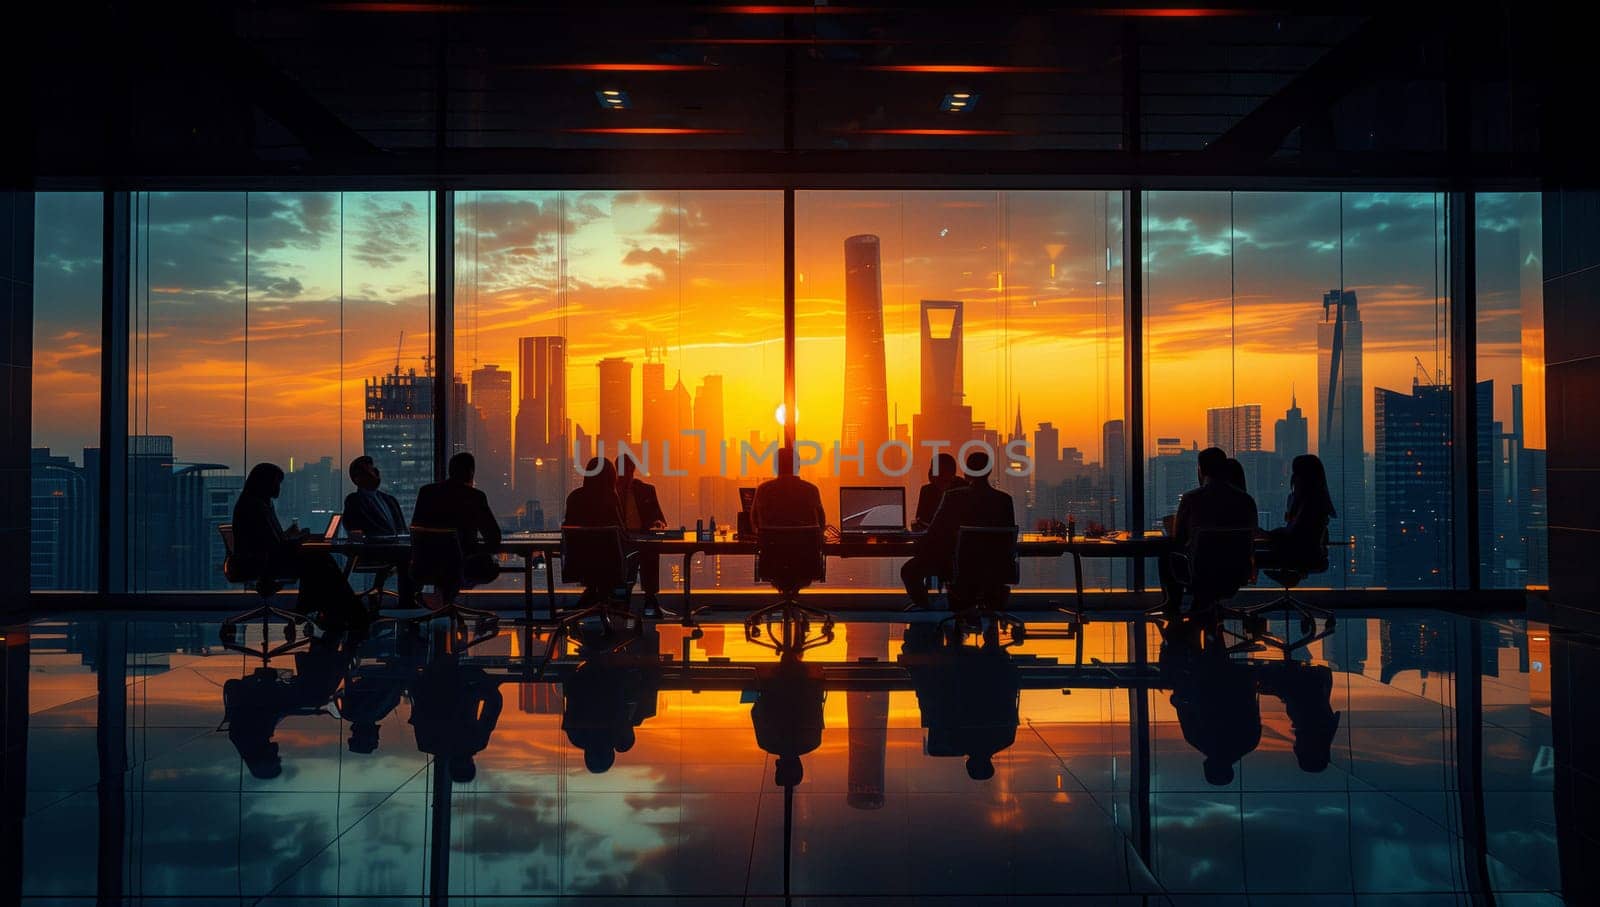 A group of people are gathered around a table by a window overlooking a city skyline at dusk, with skyscrapers silhouetted against the afterglow of the sunset